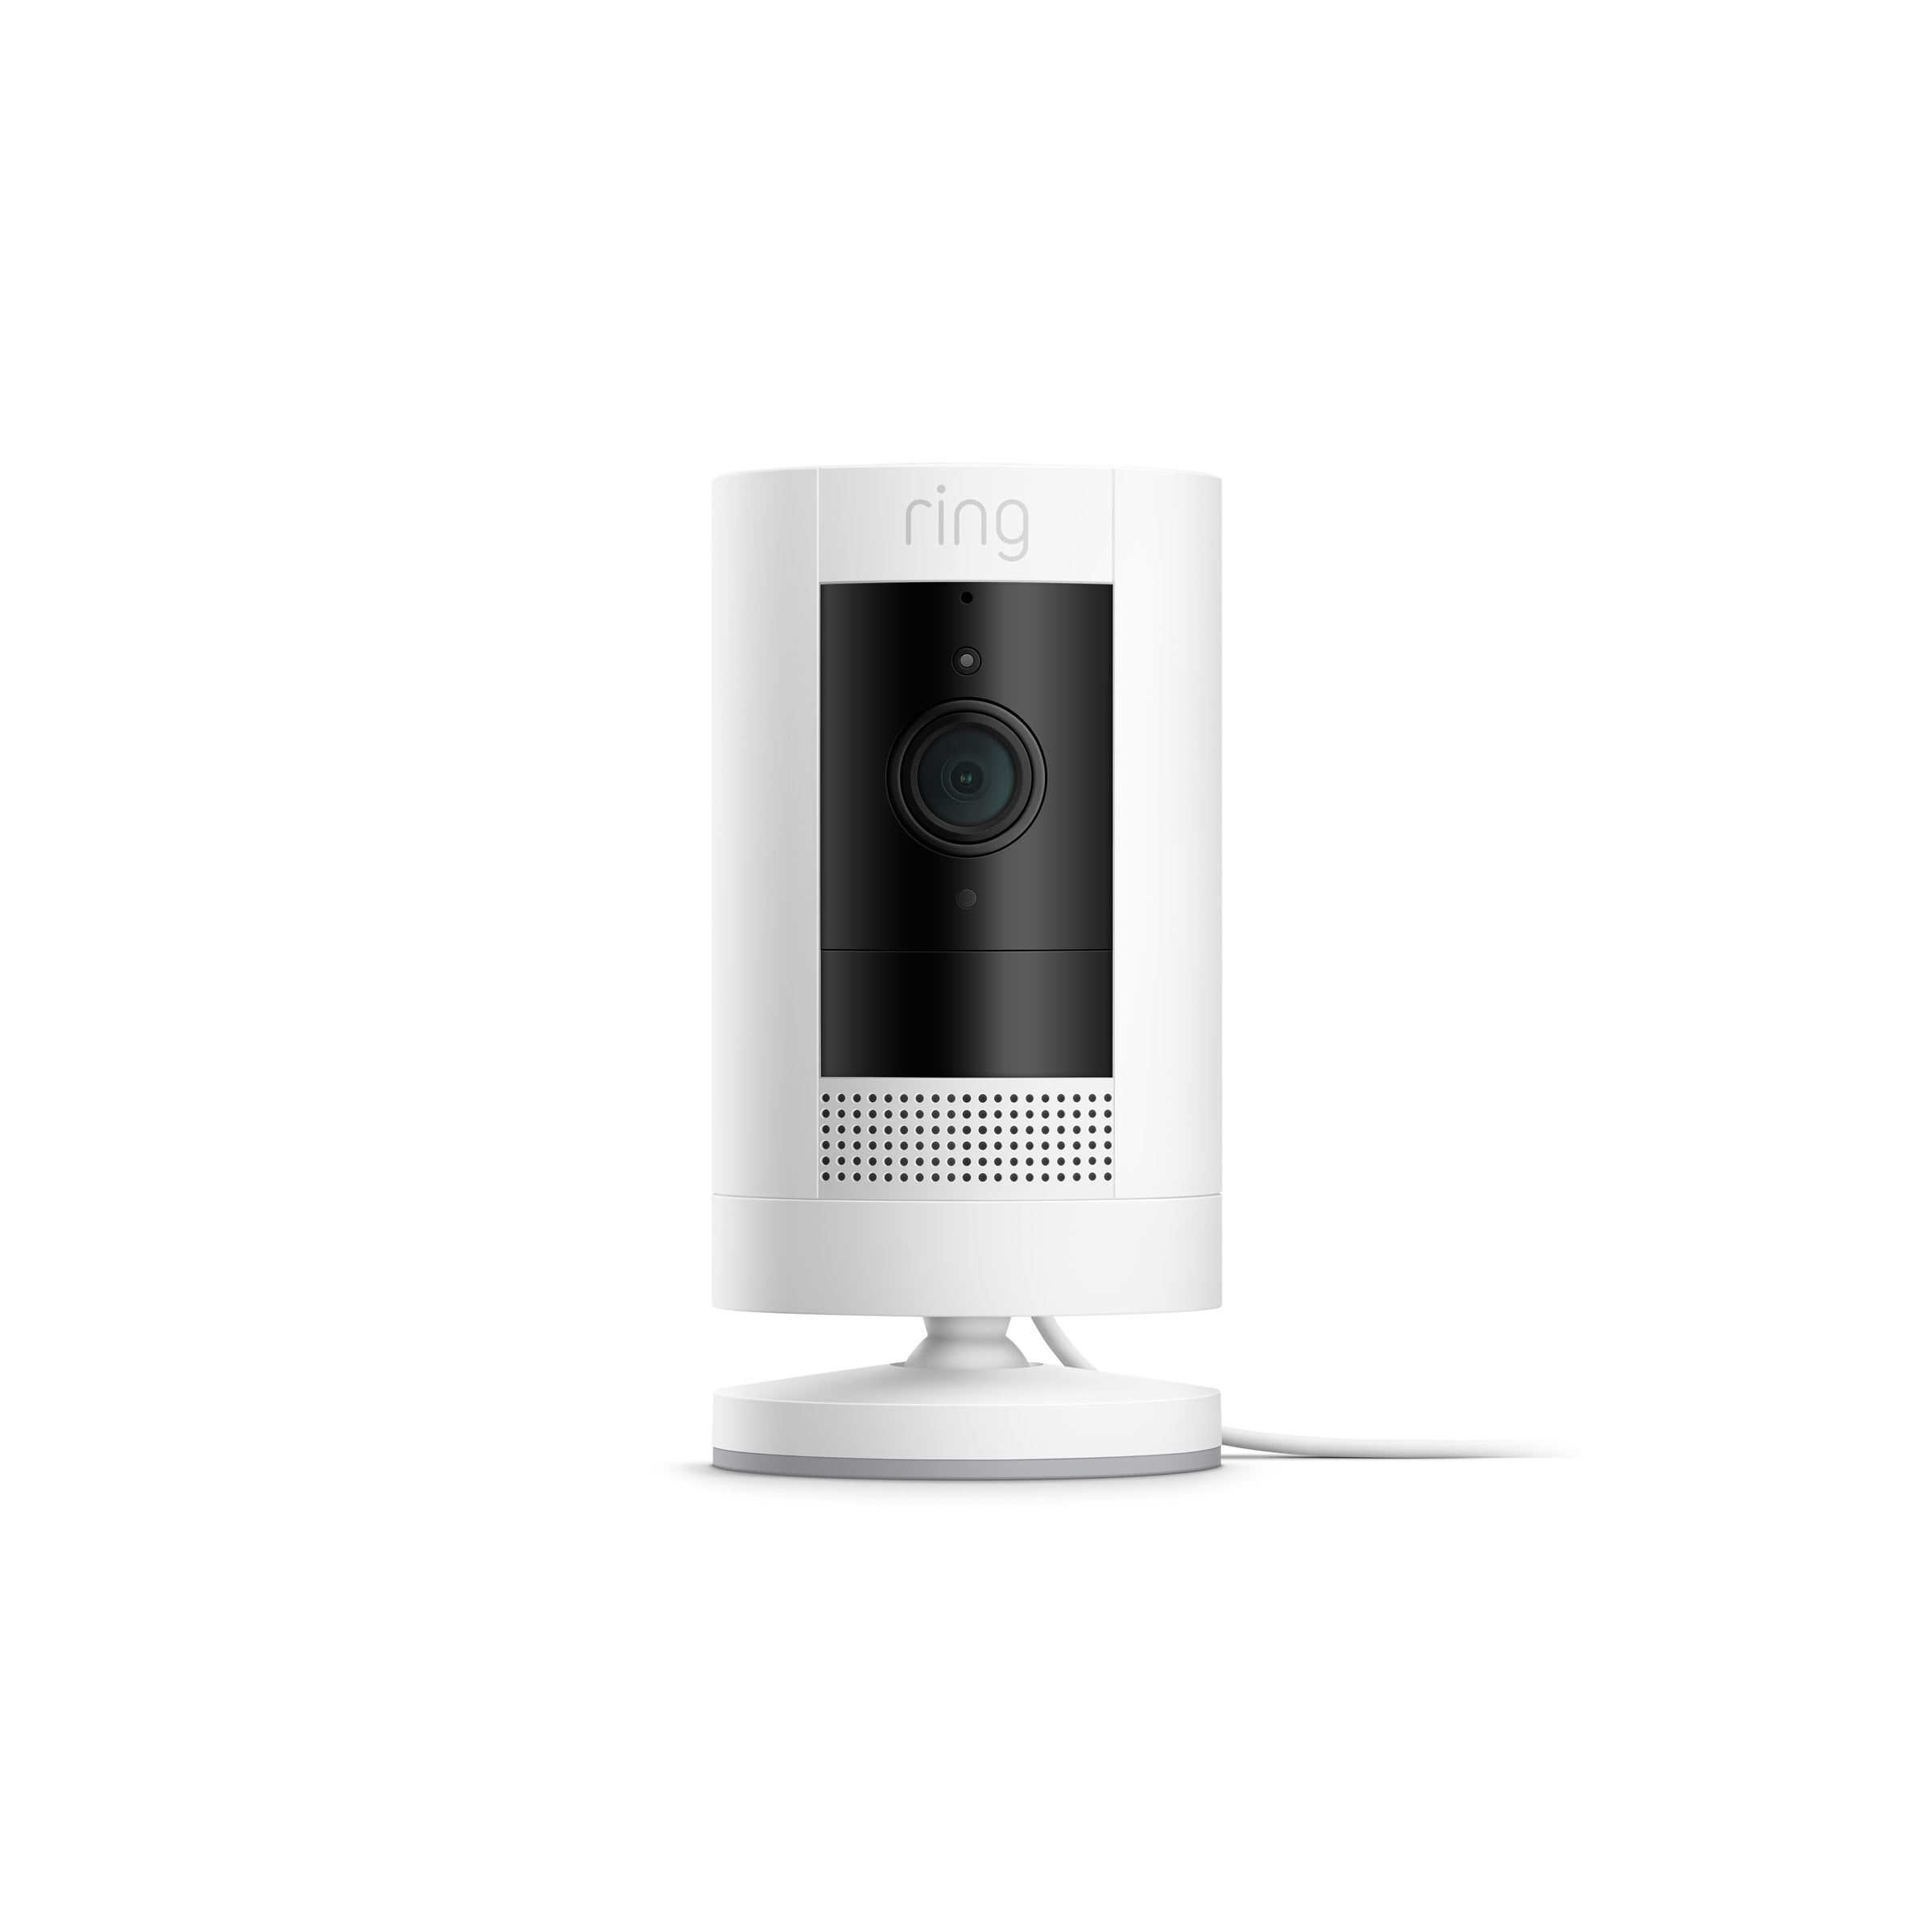 Ring Stick Up Cam Battery - Indoor/Outdoor Smart Security Wifi Video Camera  with 2-Way Talk, Night Vision, White 8SC1S9-WEN0 - The Home Depot